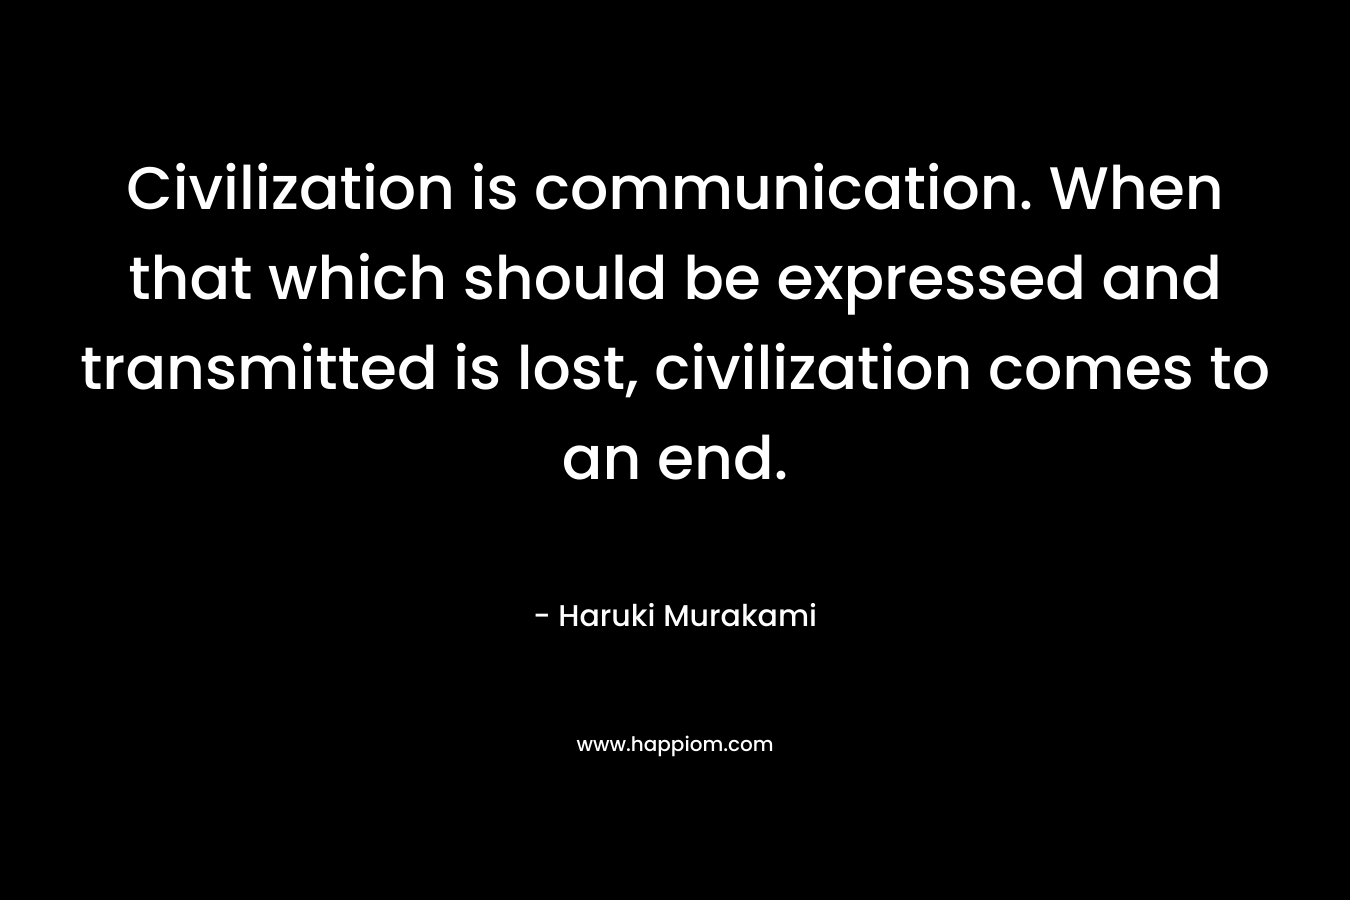 Civilization is communication. When that which should be expressed and transmitted is lost, civilization comes to an end.